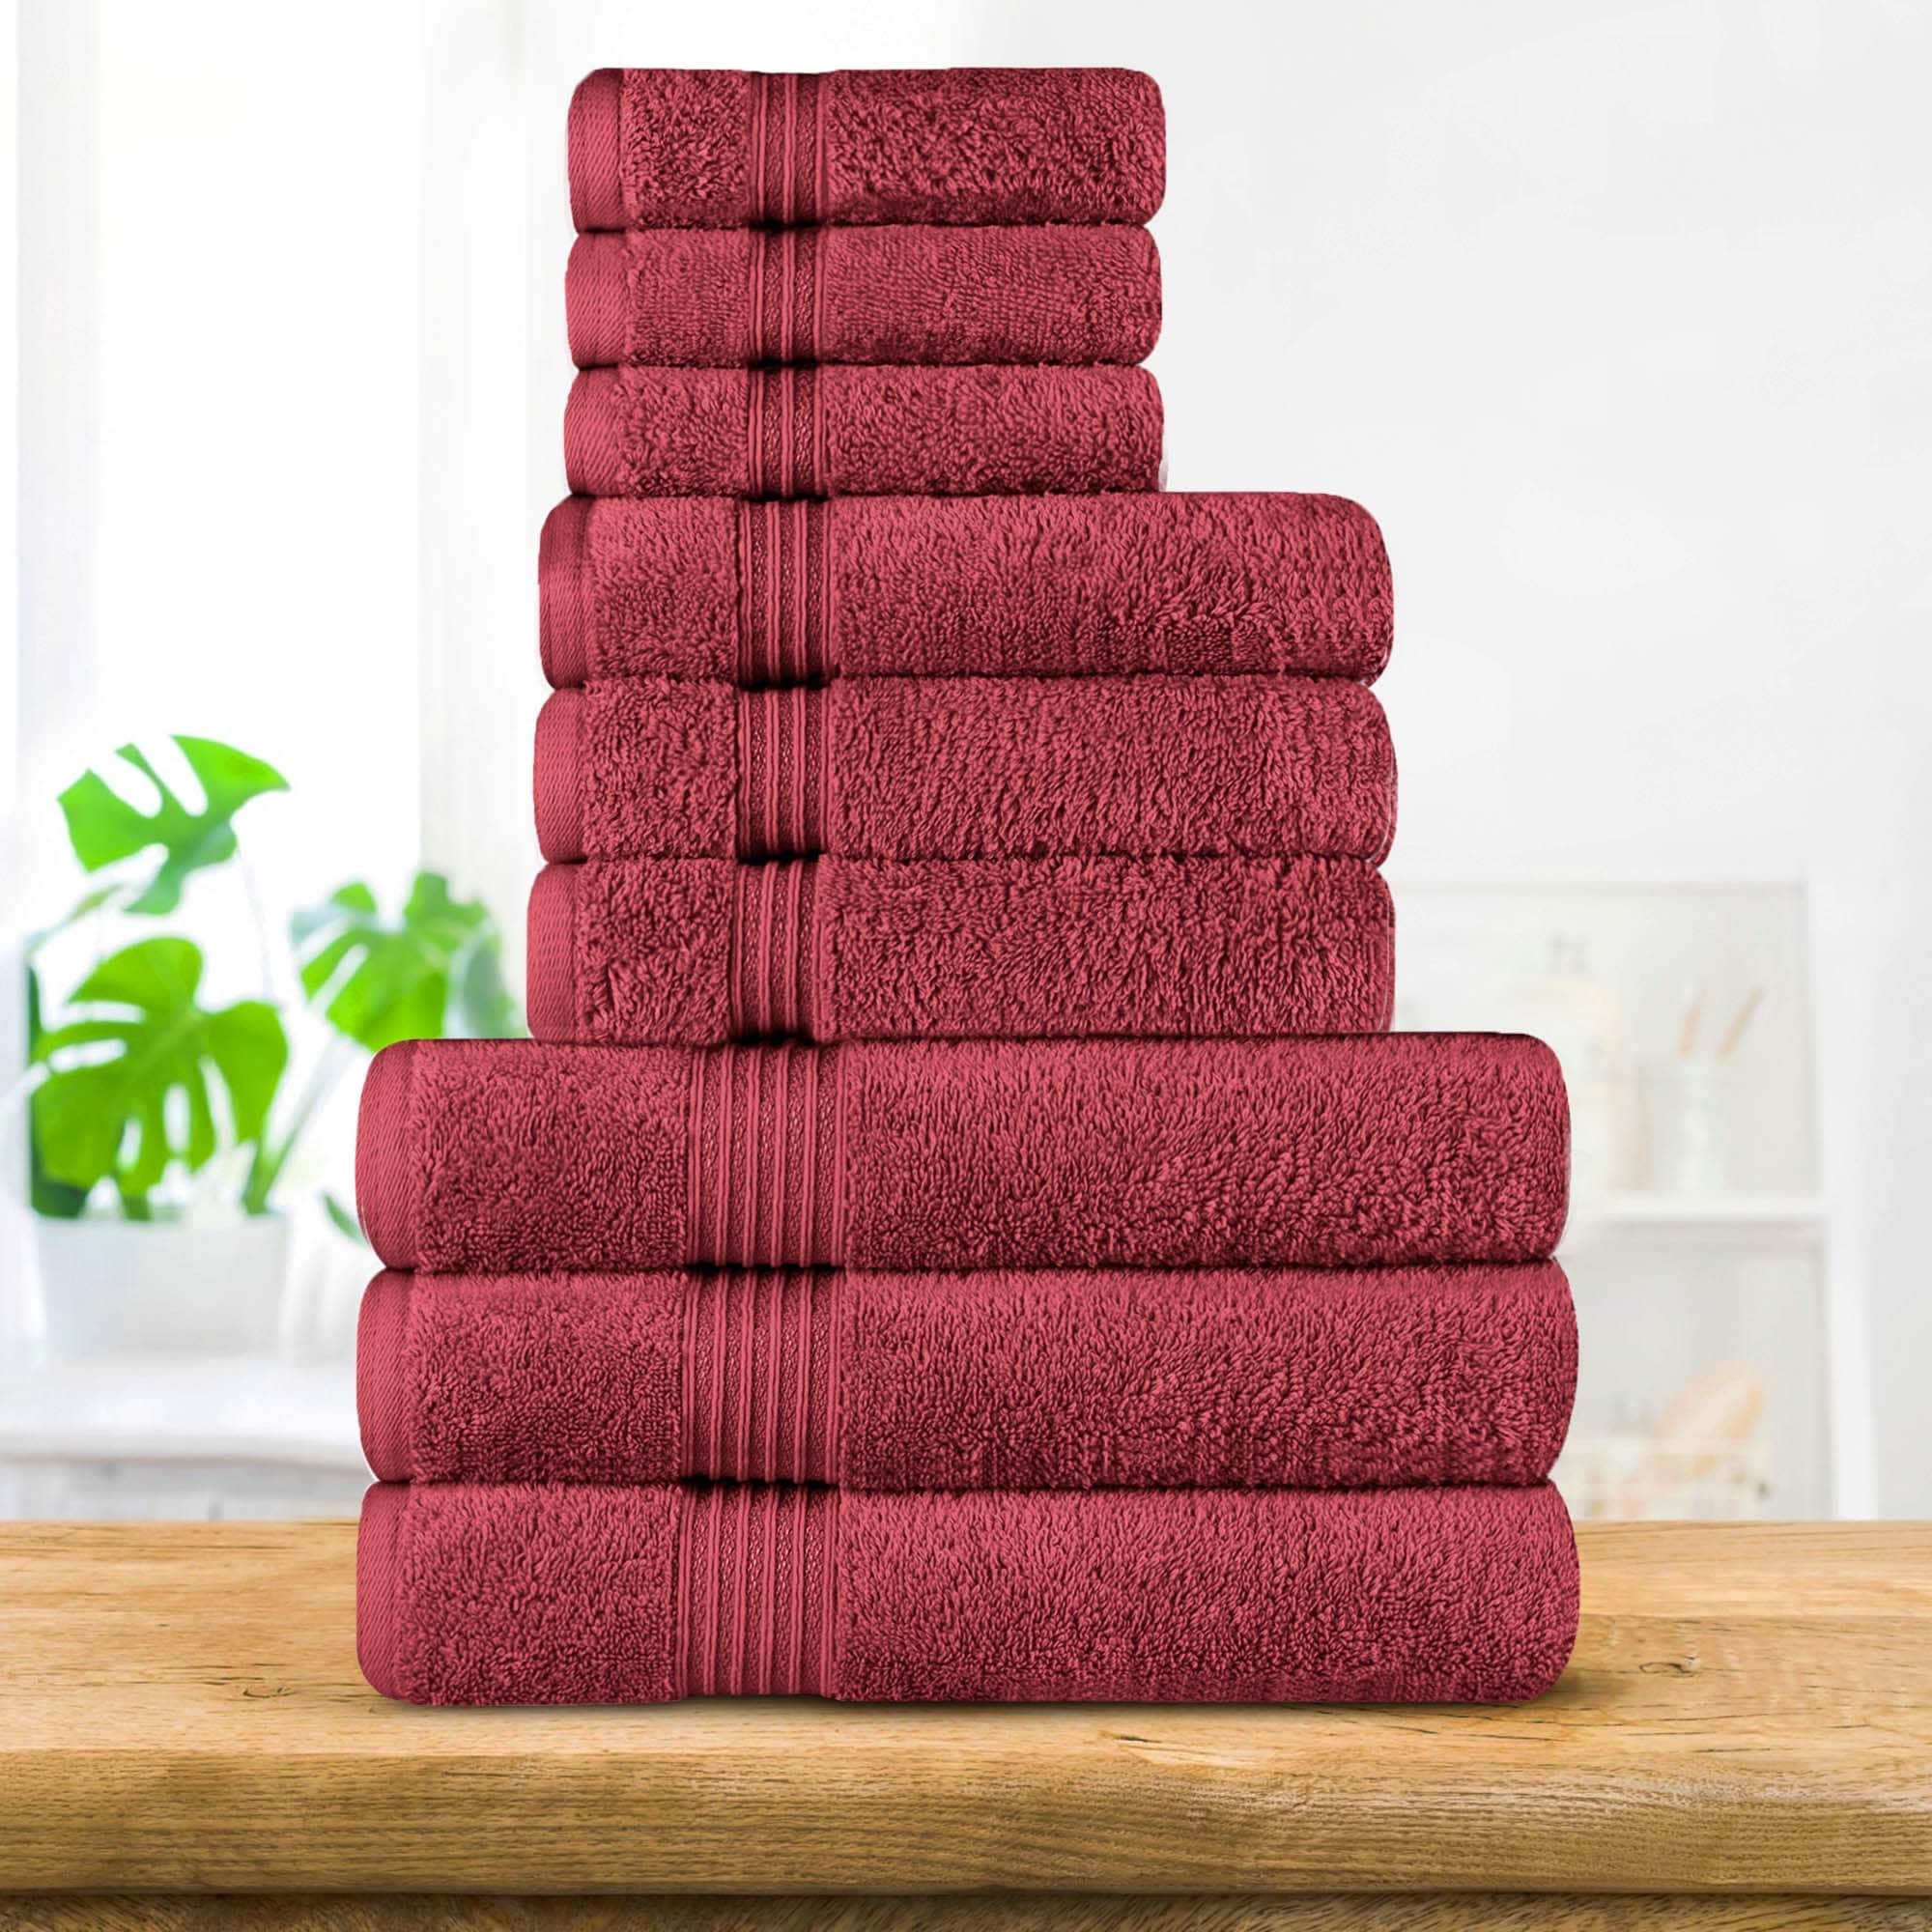 https://ak1.ostkcdn.com/images/products/is/images/direct/11b3b6c7eeaf2fbe1a9e9c74fe317237890e1c04/Superior-Heritage-Egyptian-Cotton-Heavyweight-9-PC-Bathroom-Towel-Set.jpg